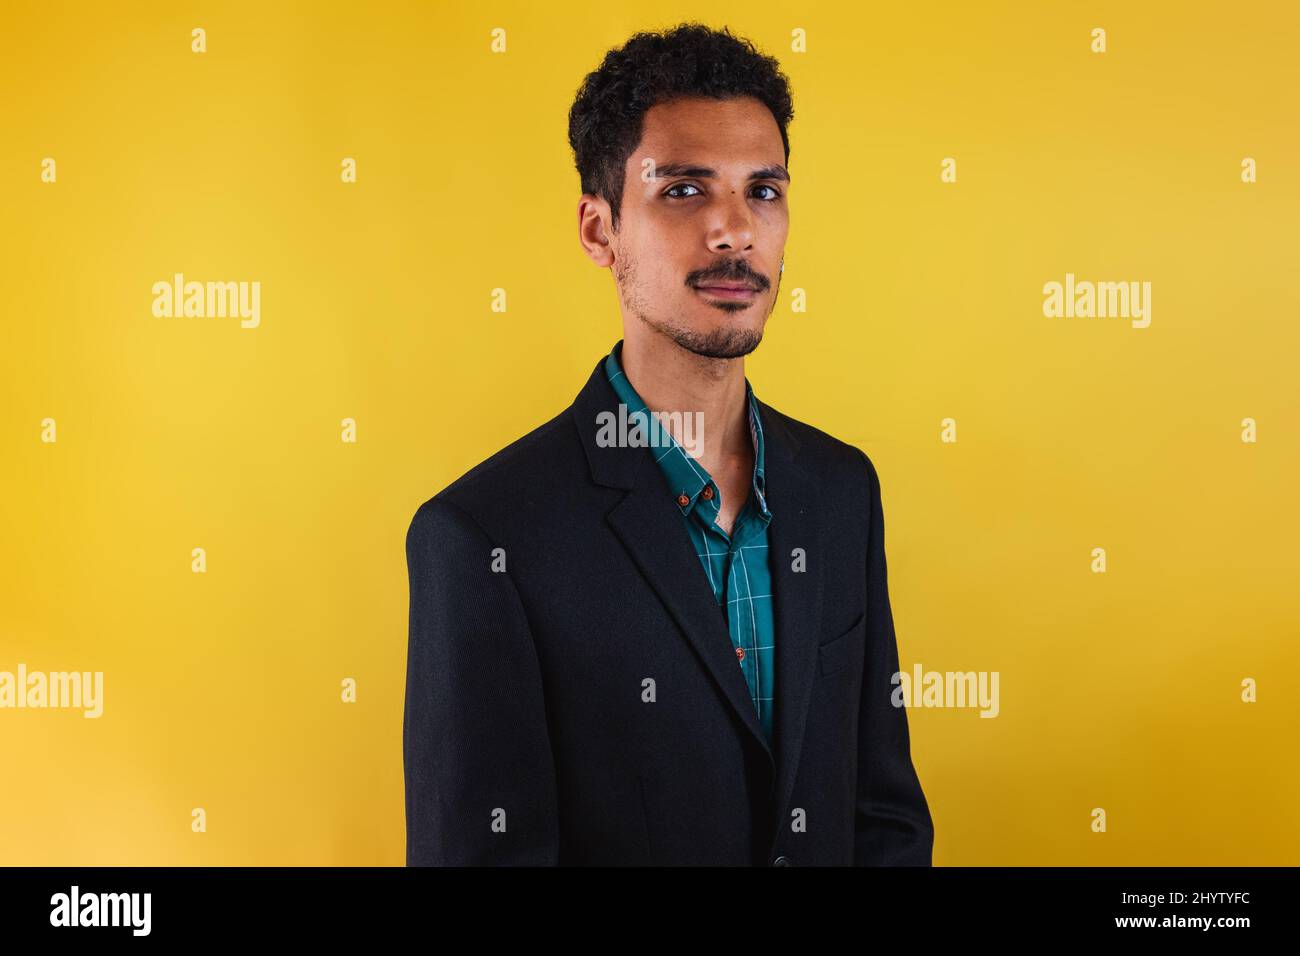 Black man in a suit in the studio isolated on yellow background. Stock Photo